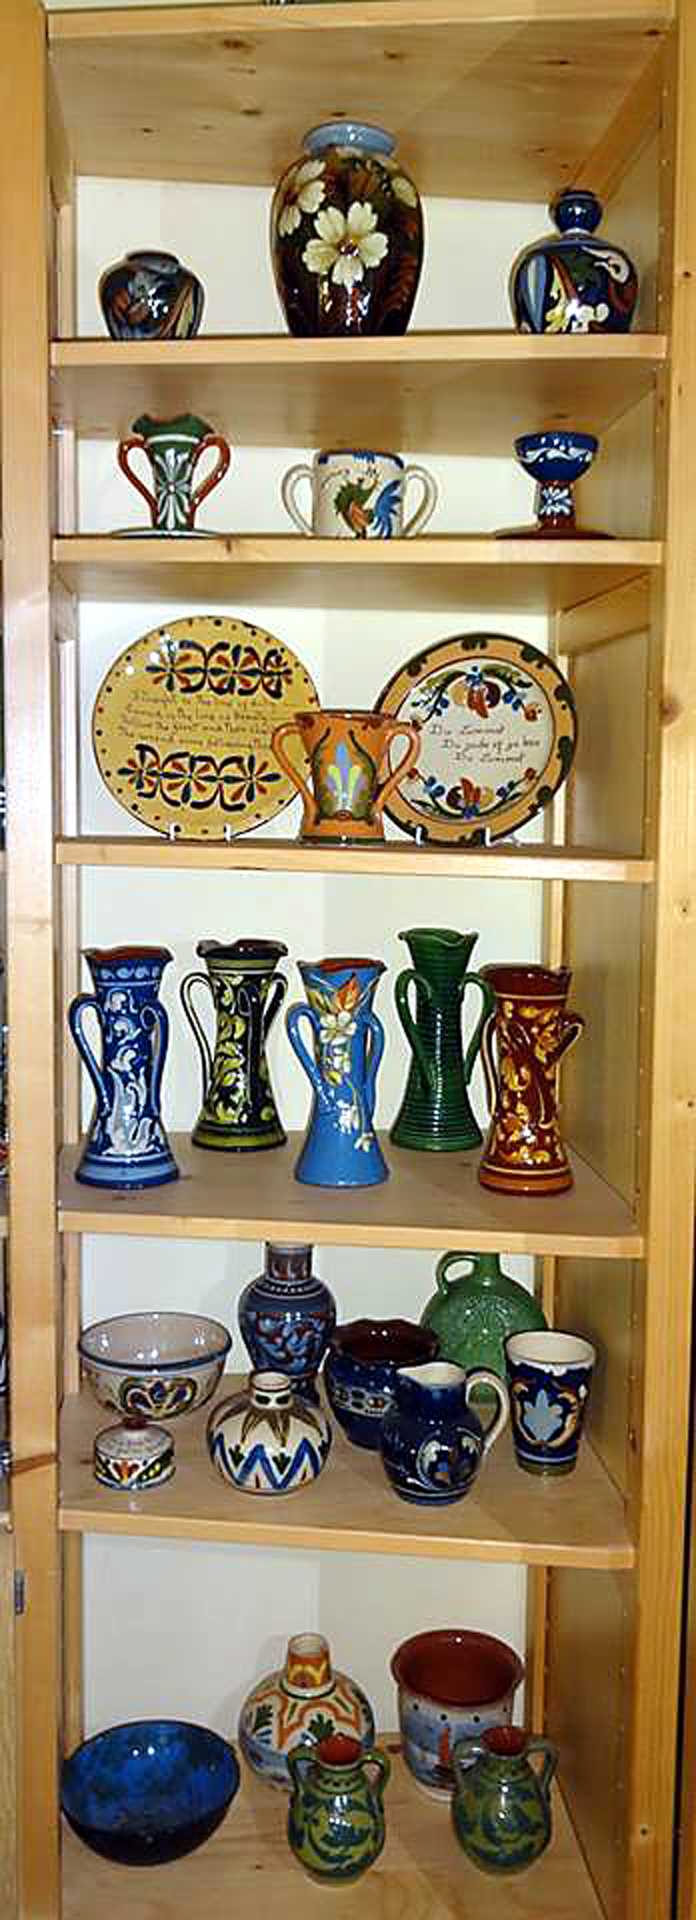 Steps to Display Your Pottery Collection